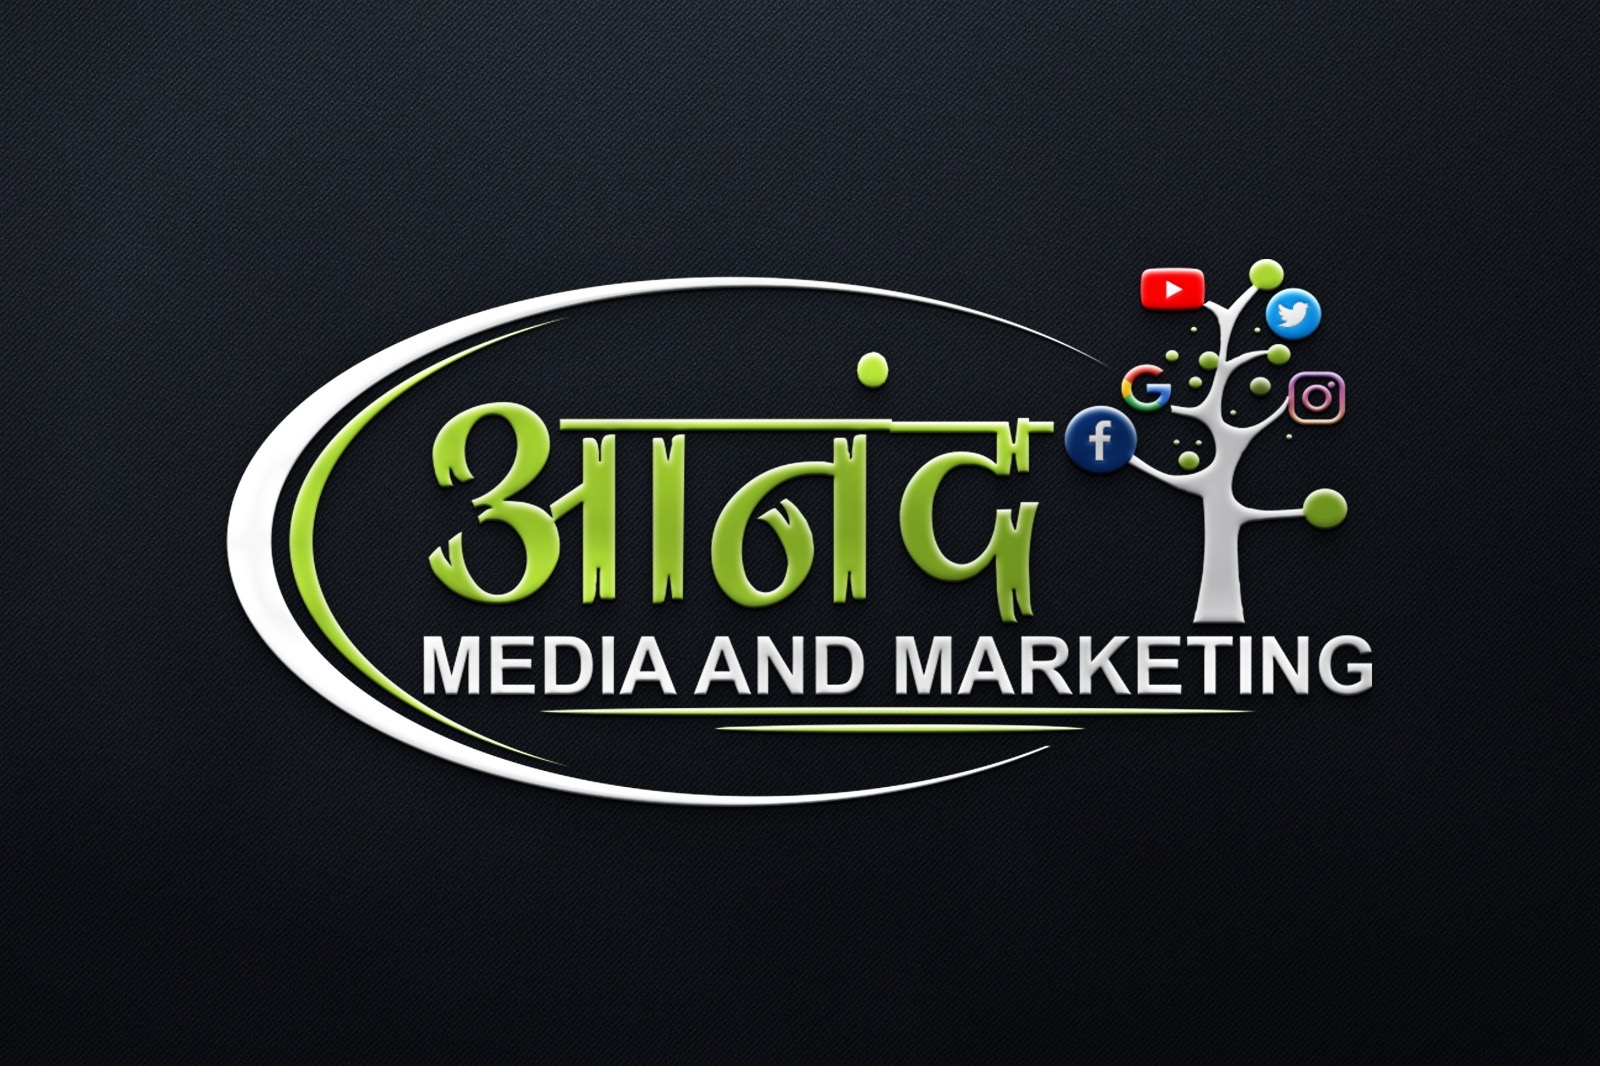 ANAND MEDIA AND MARKETING (AM&M)